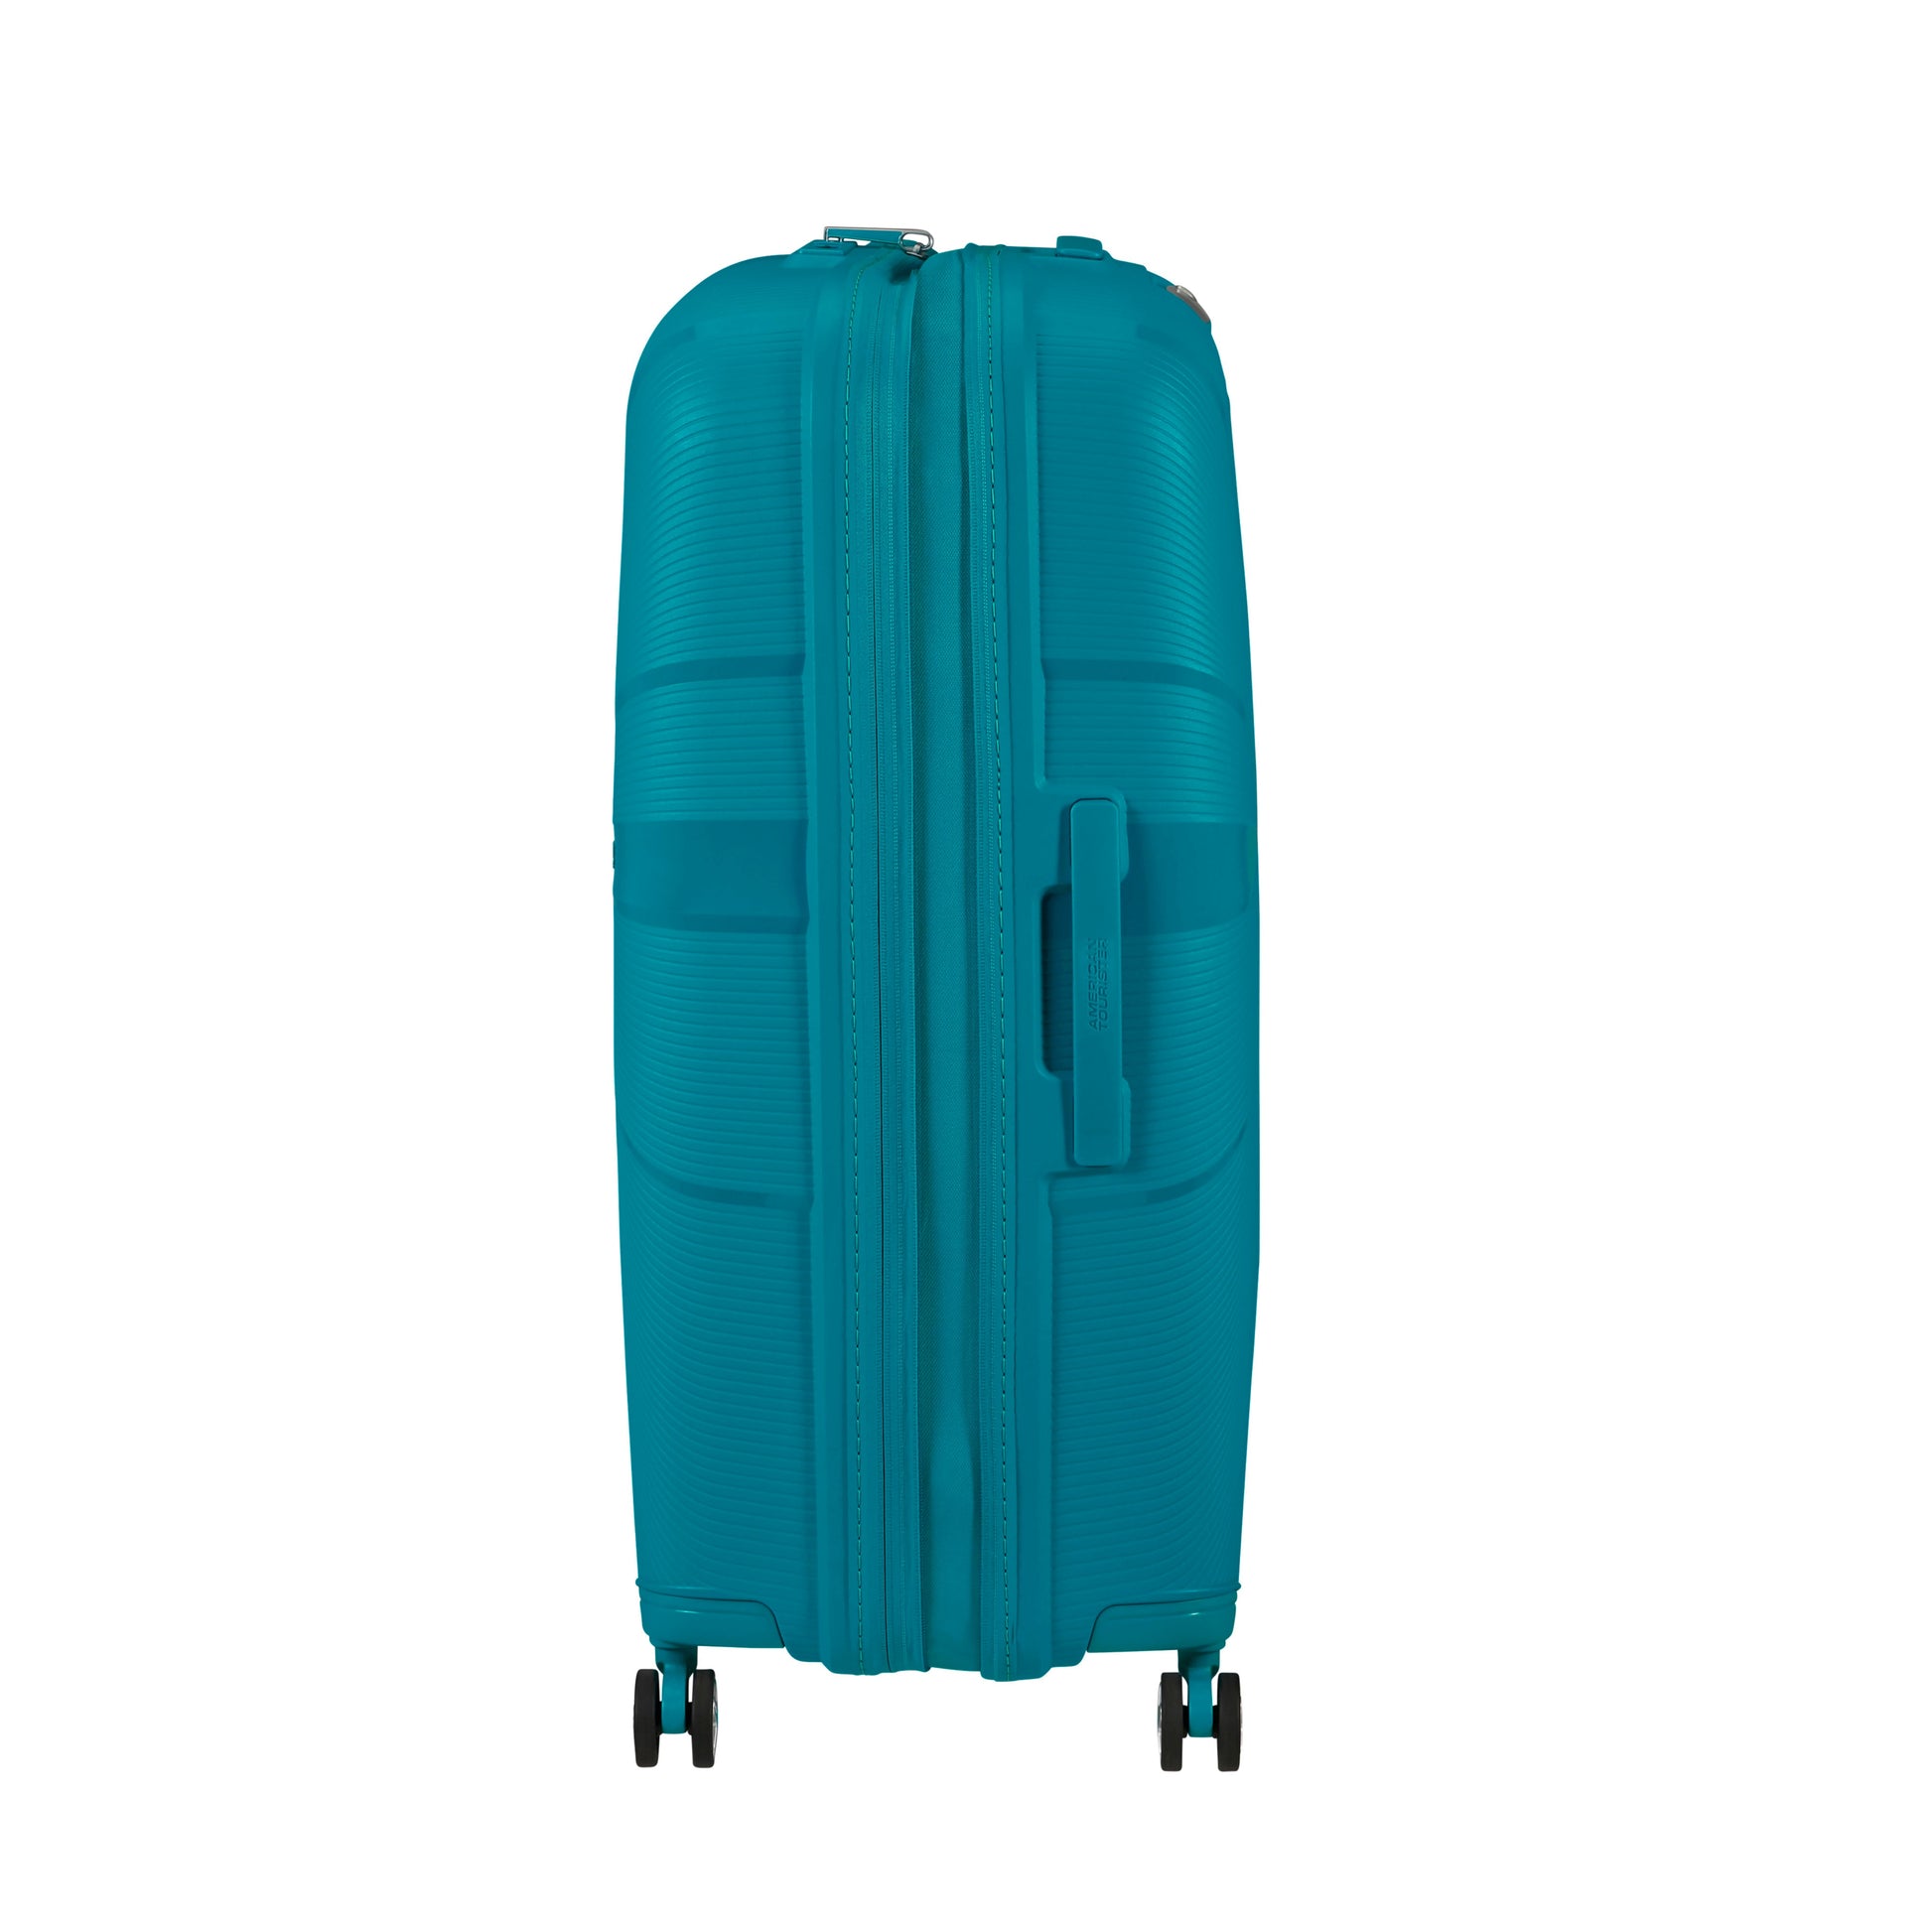 American Tourister StarVibe 3-Piece Spinner Expandable Luggage Set